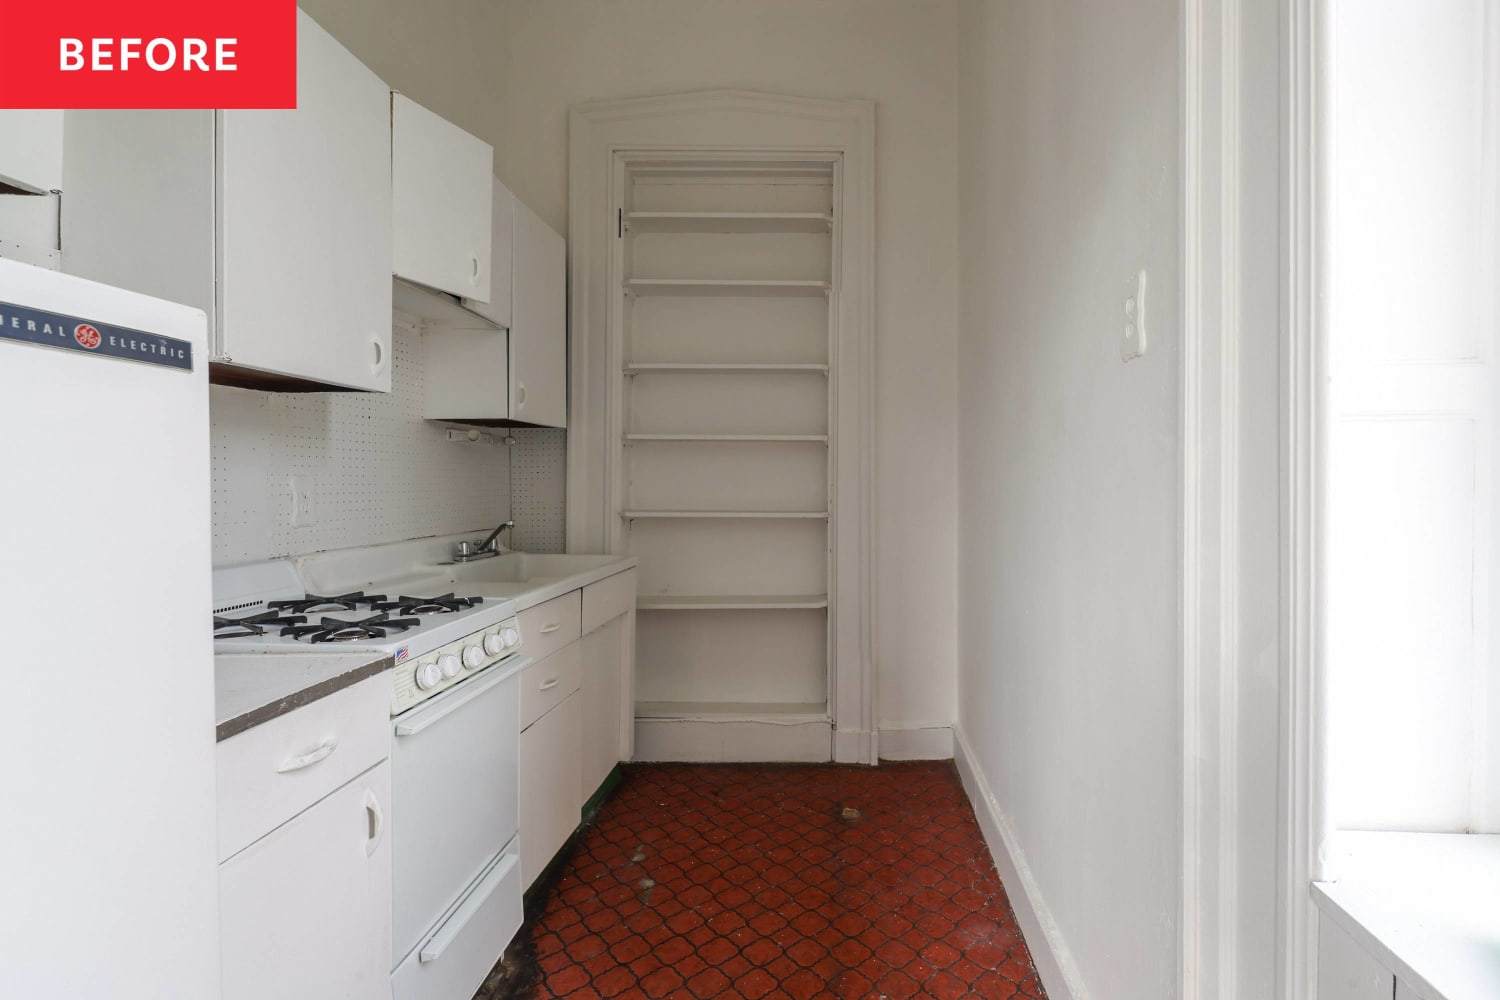 A “Beyond Busted” Studio Kitchen Gets a Cozy Two-Day Makeover (for $1,400!)